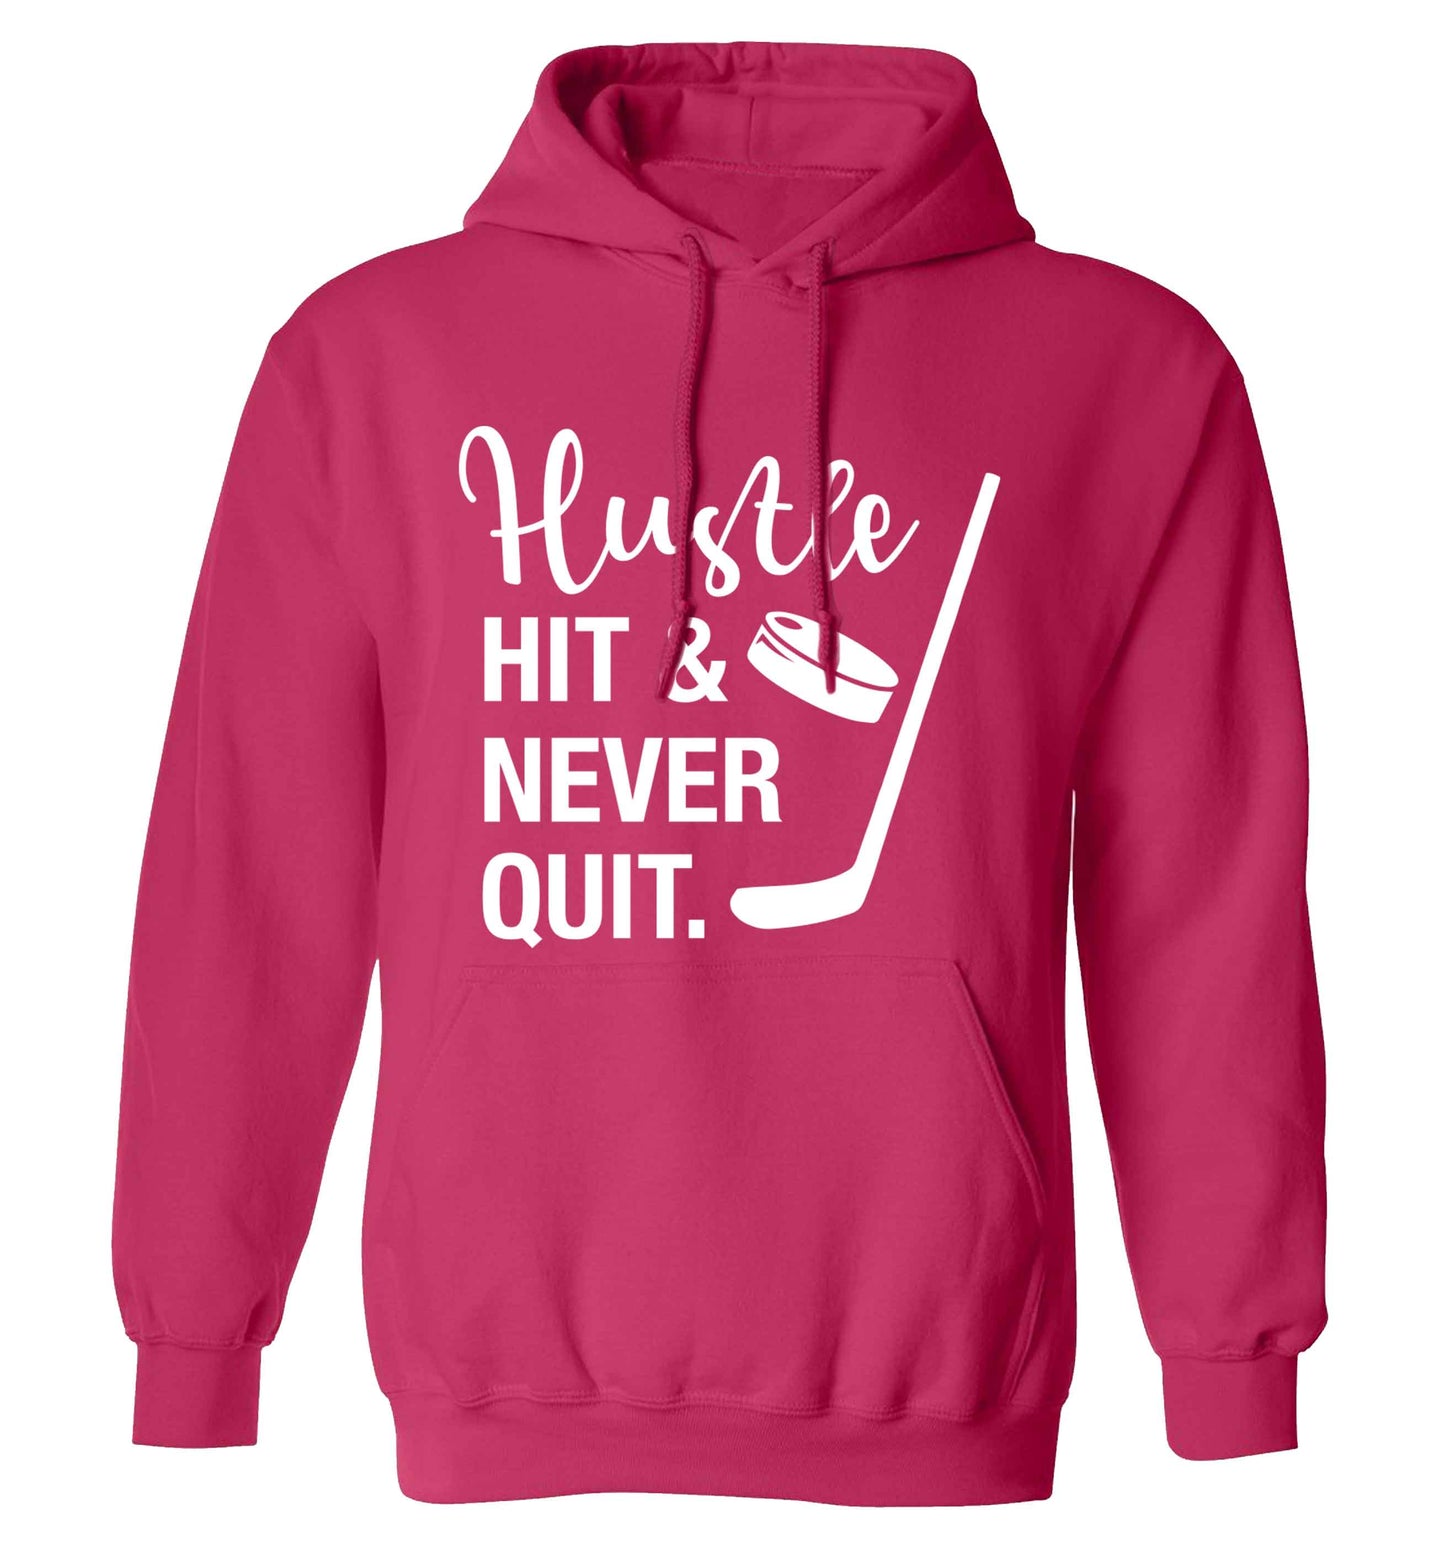 Hustle hit and never quit adults unisex pink hoodie 2XL